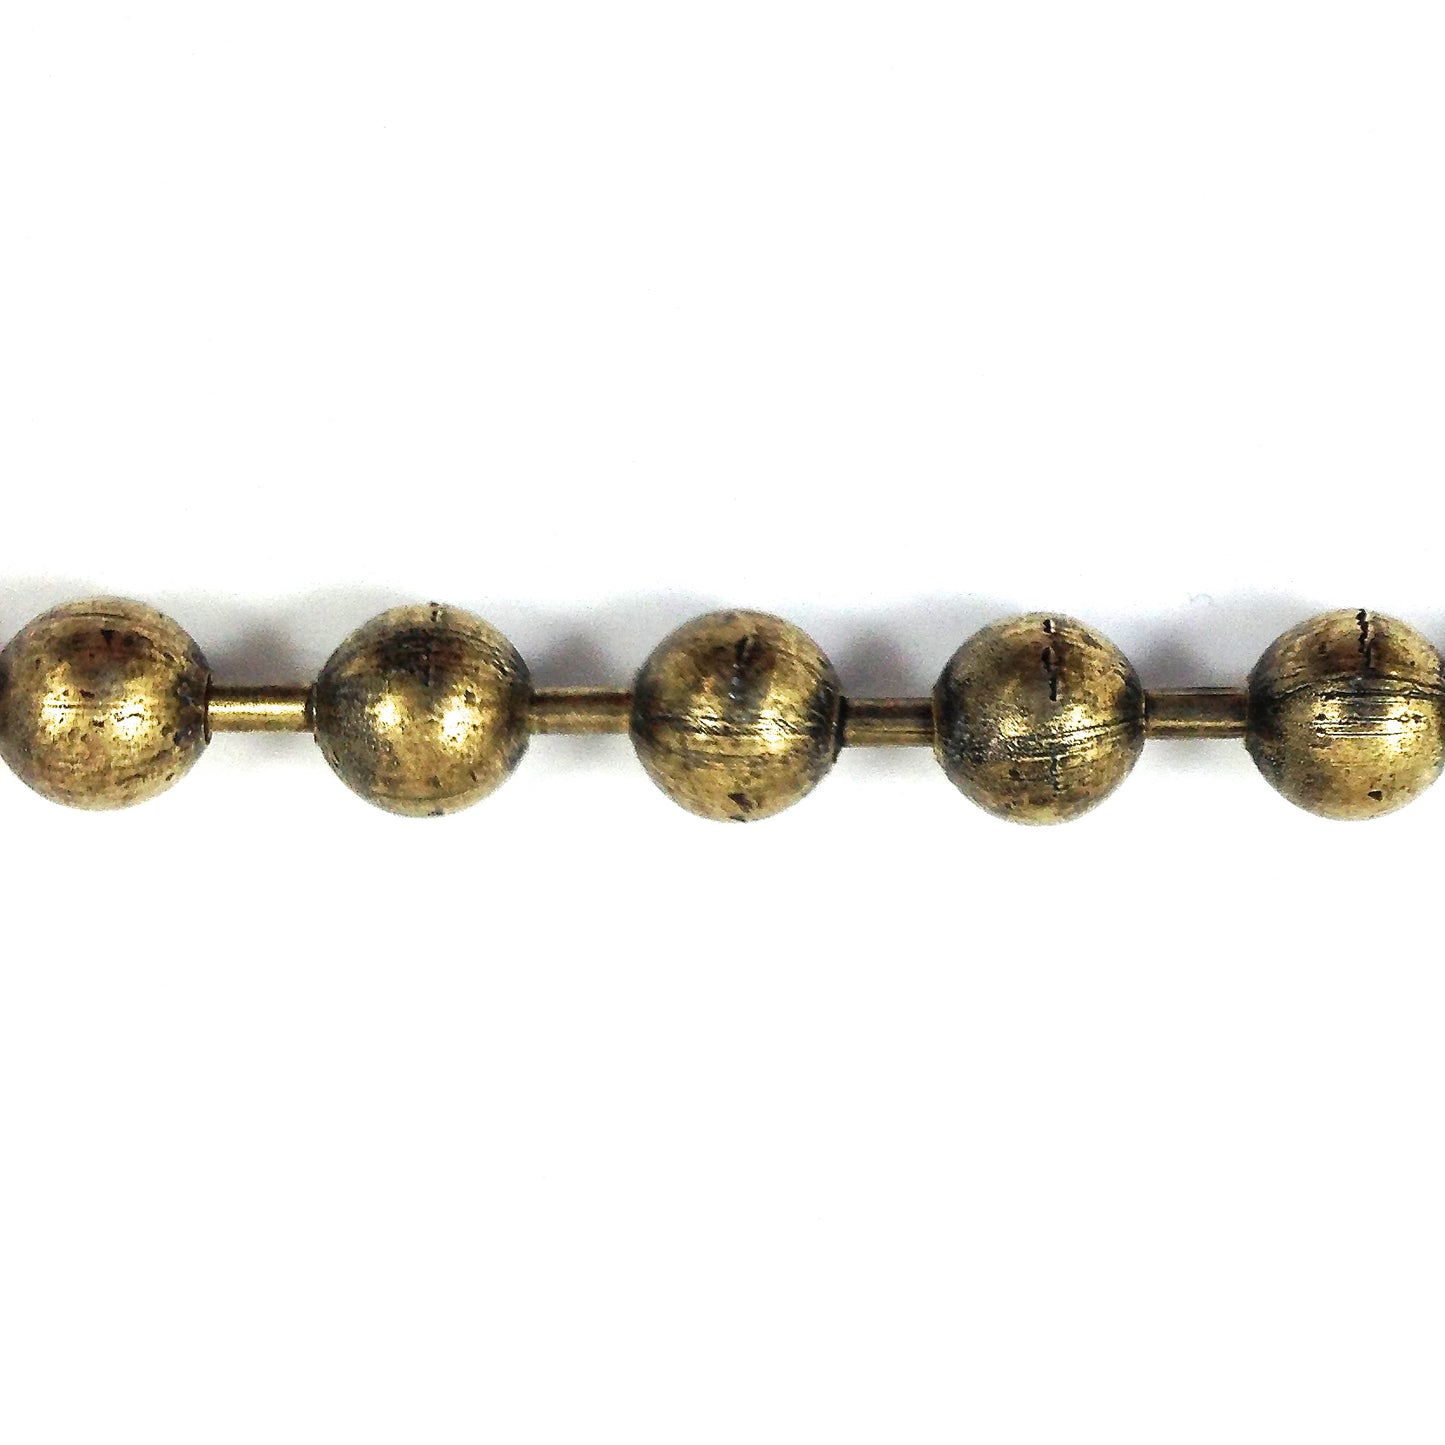 6mm Dog Tag Beaded Ball Chain, vintage gold bronze, 10 foot roll